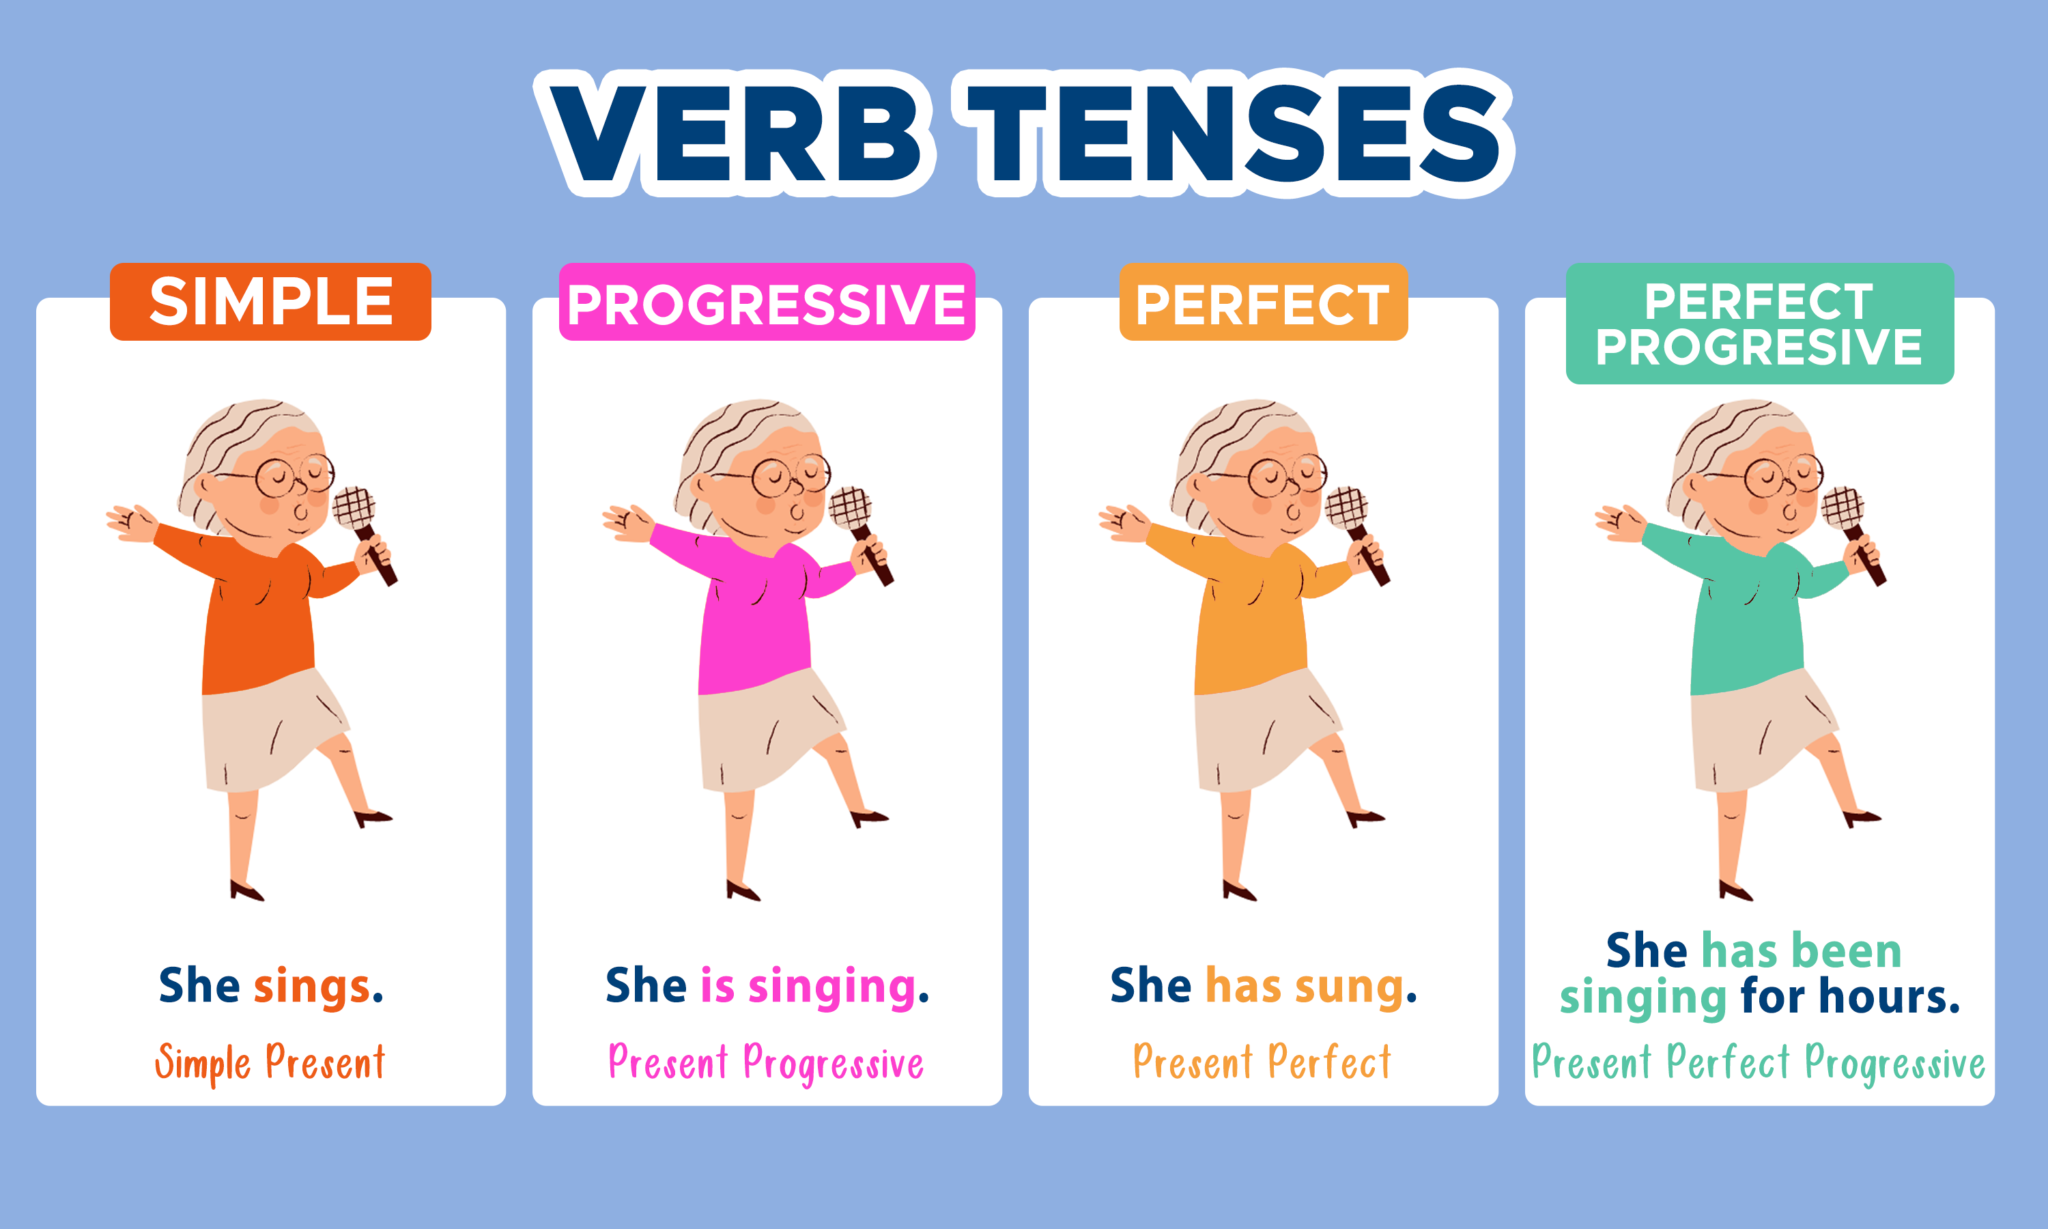 verb-tenses-how-to-use-the-12-english-tenses-correctly-7esl-verb